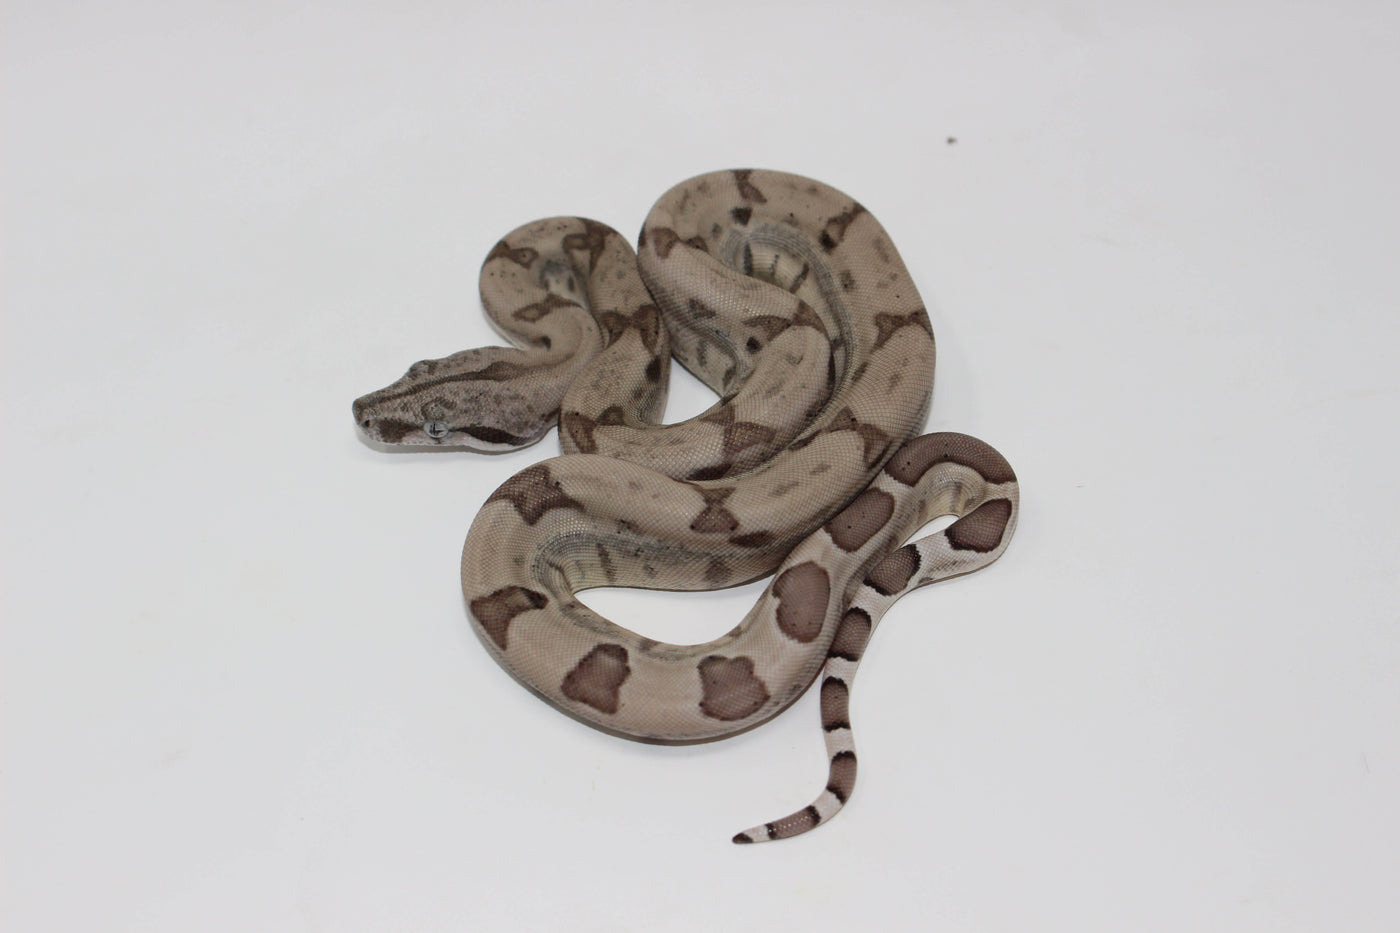 ghost colombian boa constrictor for sale, buy reptiles online